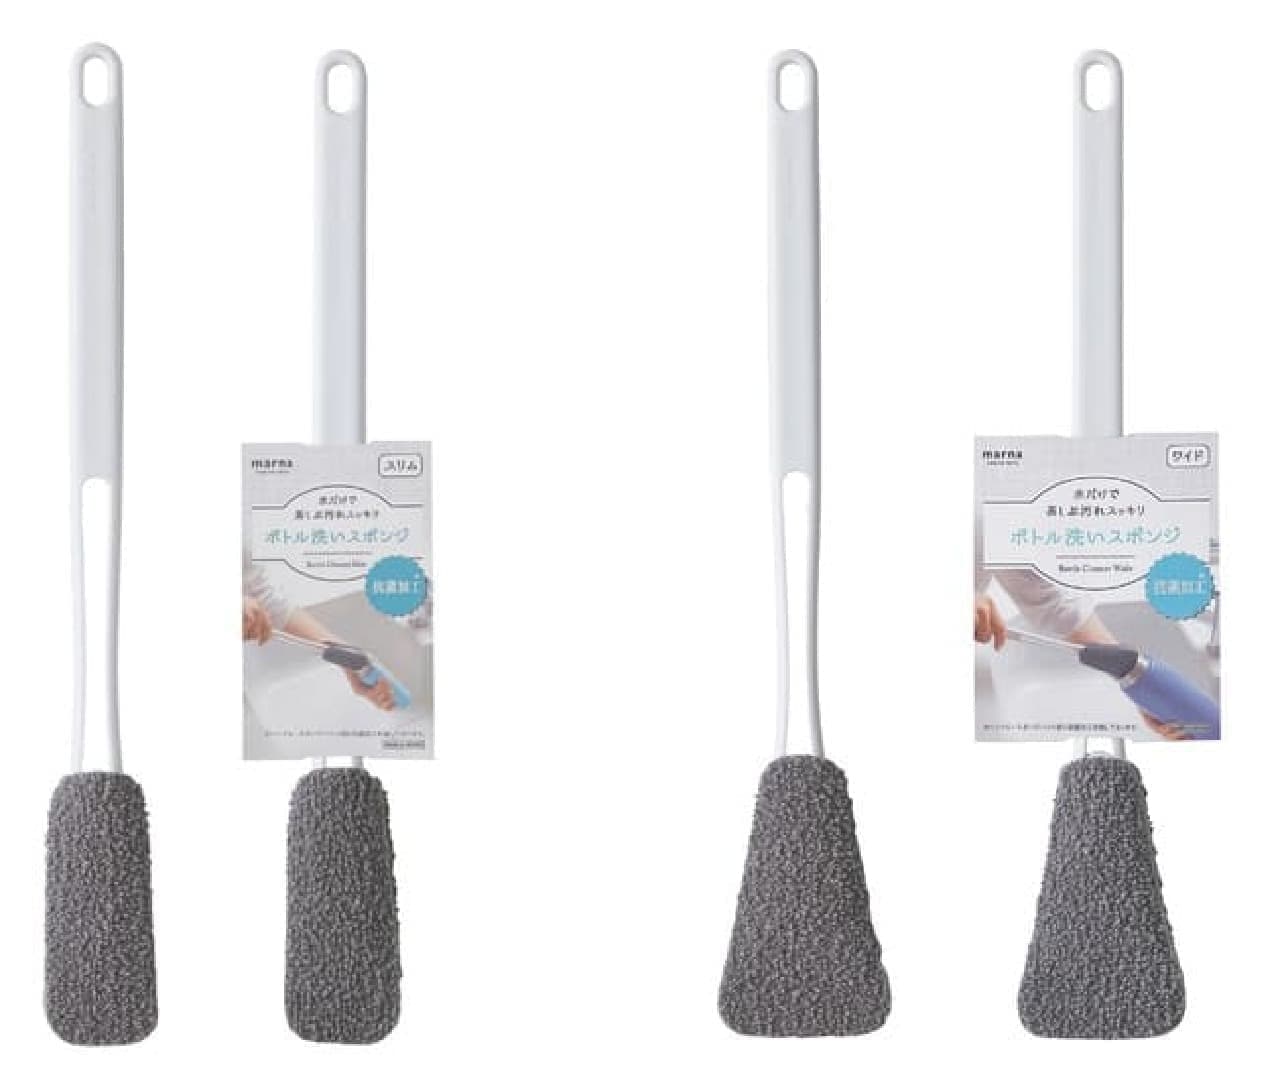 Bottle Washing Sponge" from Marna -- Removes tea stains with just water! Two sizes, slim and wide